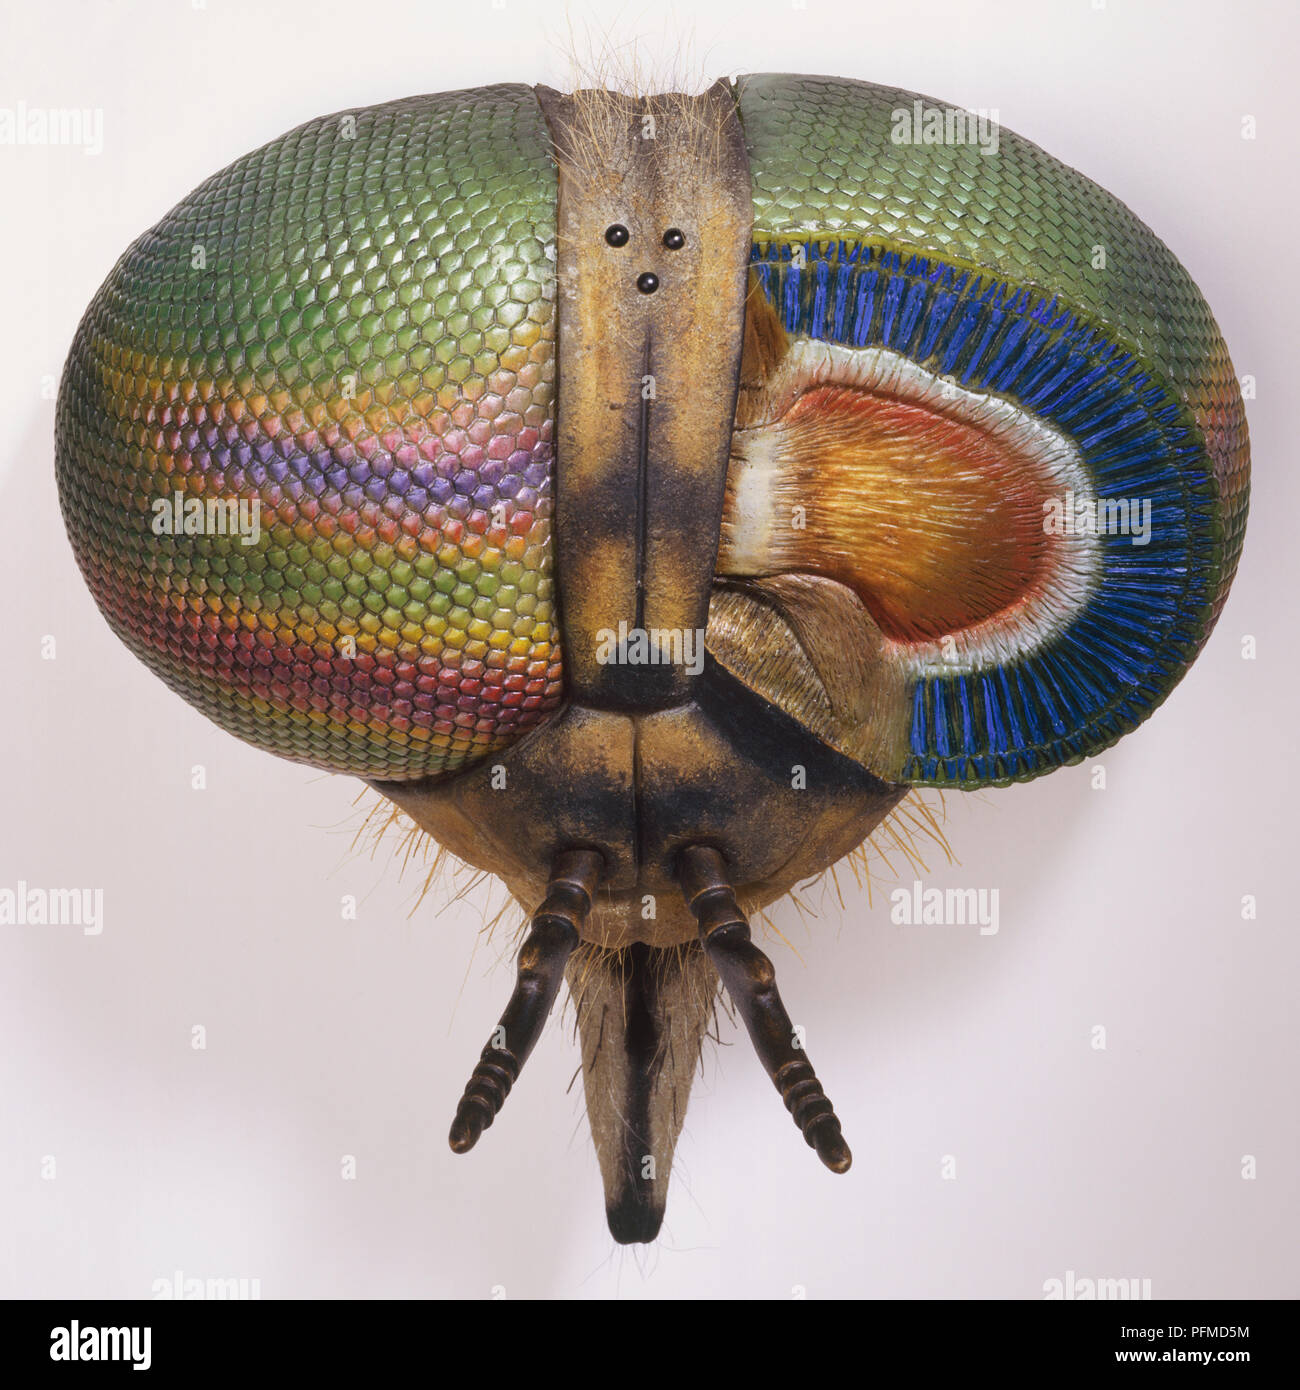 Close-up model of head of horsefly showing a cross-section of its eye. Stock Photo